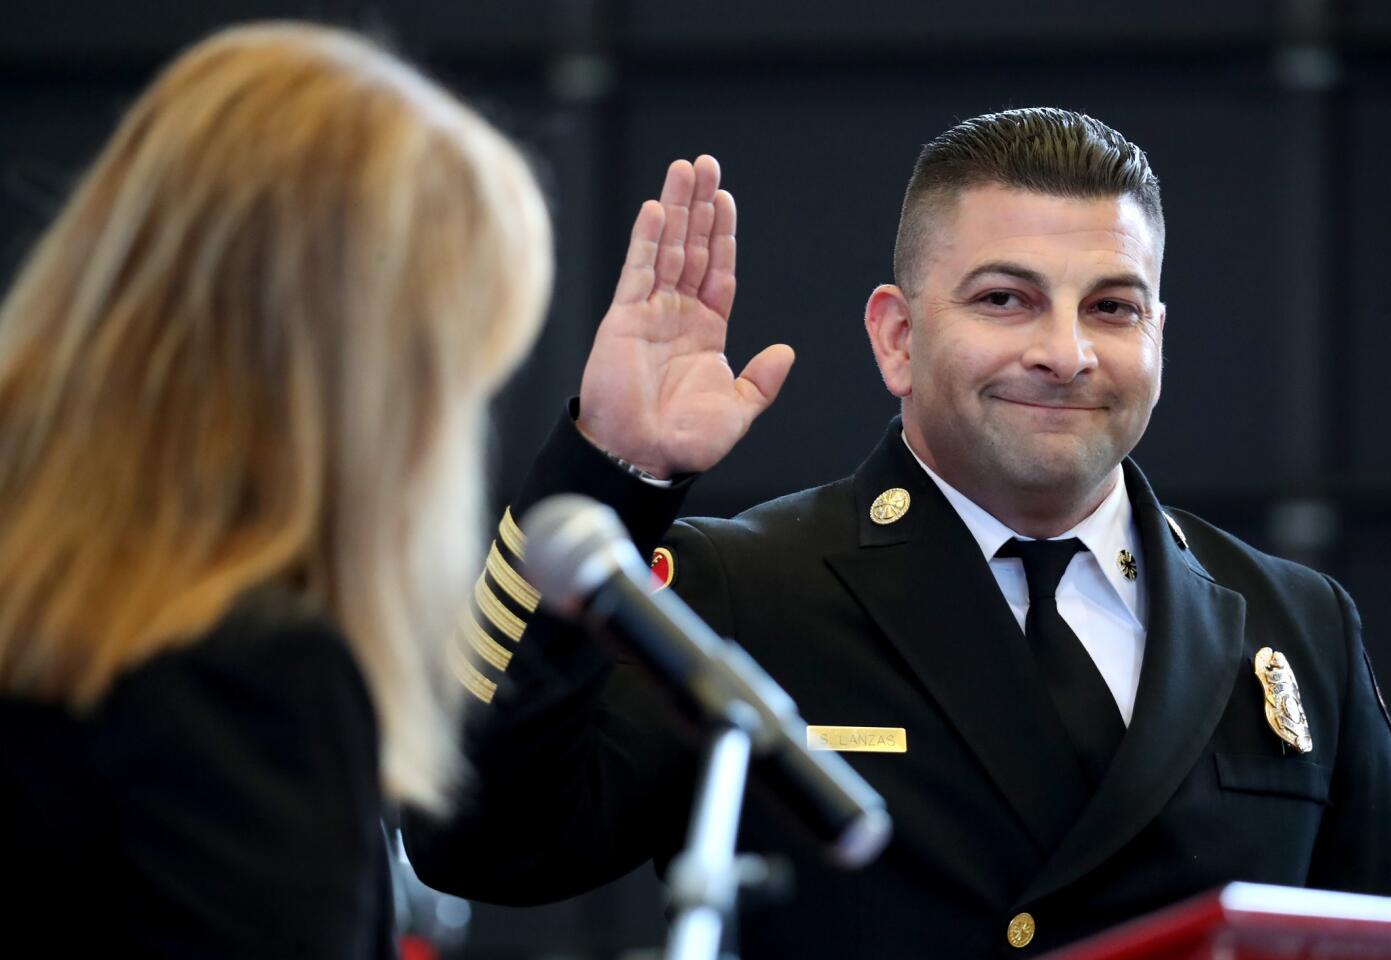 New Glendale fire chief Silvio Lanzas was sworn in by Glendale city manager Yasmin Beers during formal swearing in ceremony at Station 21 in Glendale on Thursday, Feb. 21, 2019.